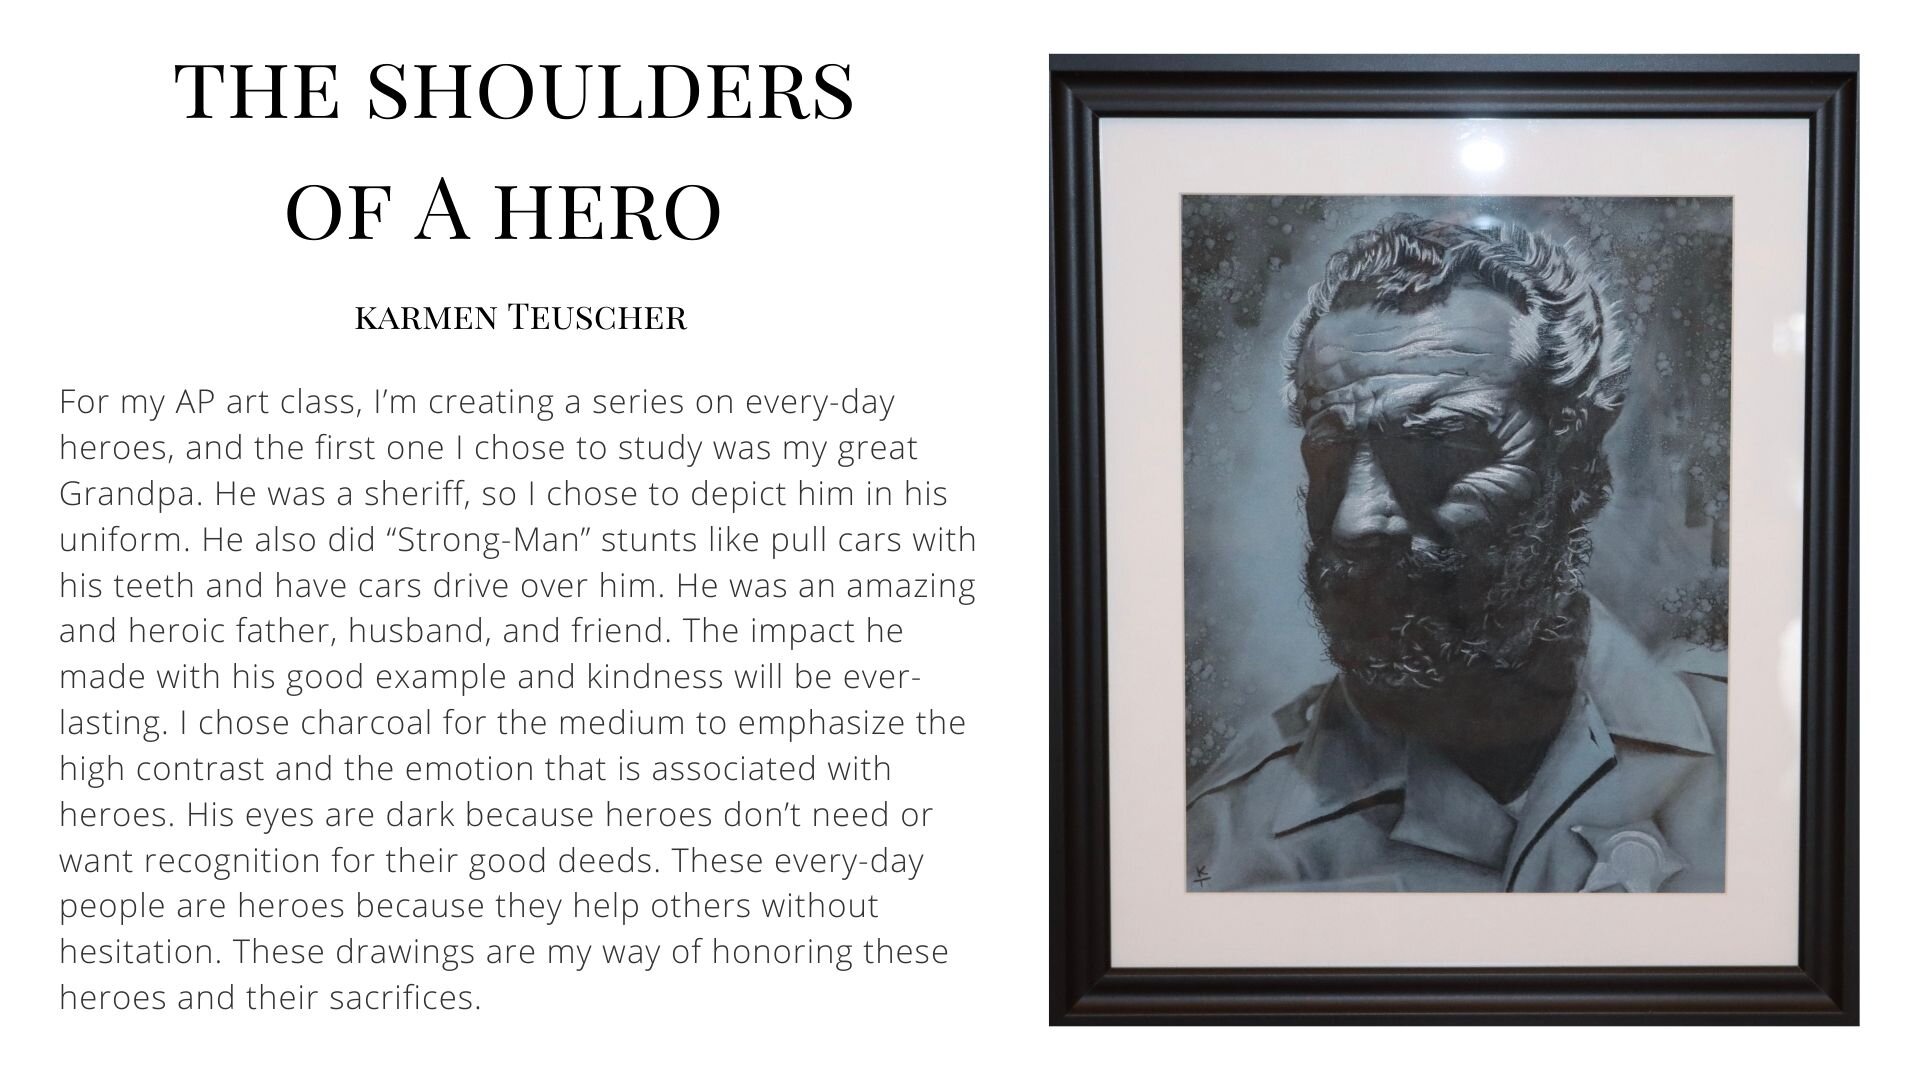 The Shoulders of a Hero